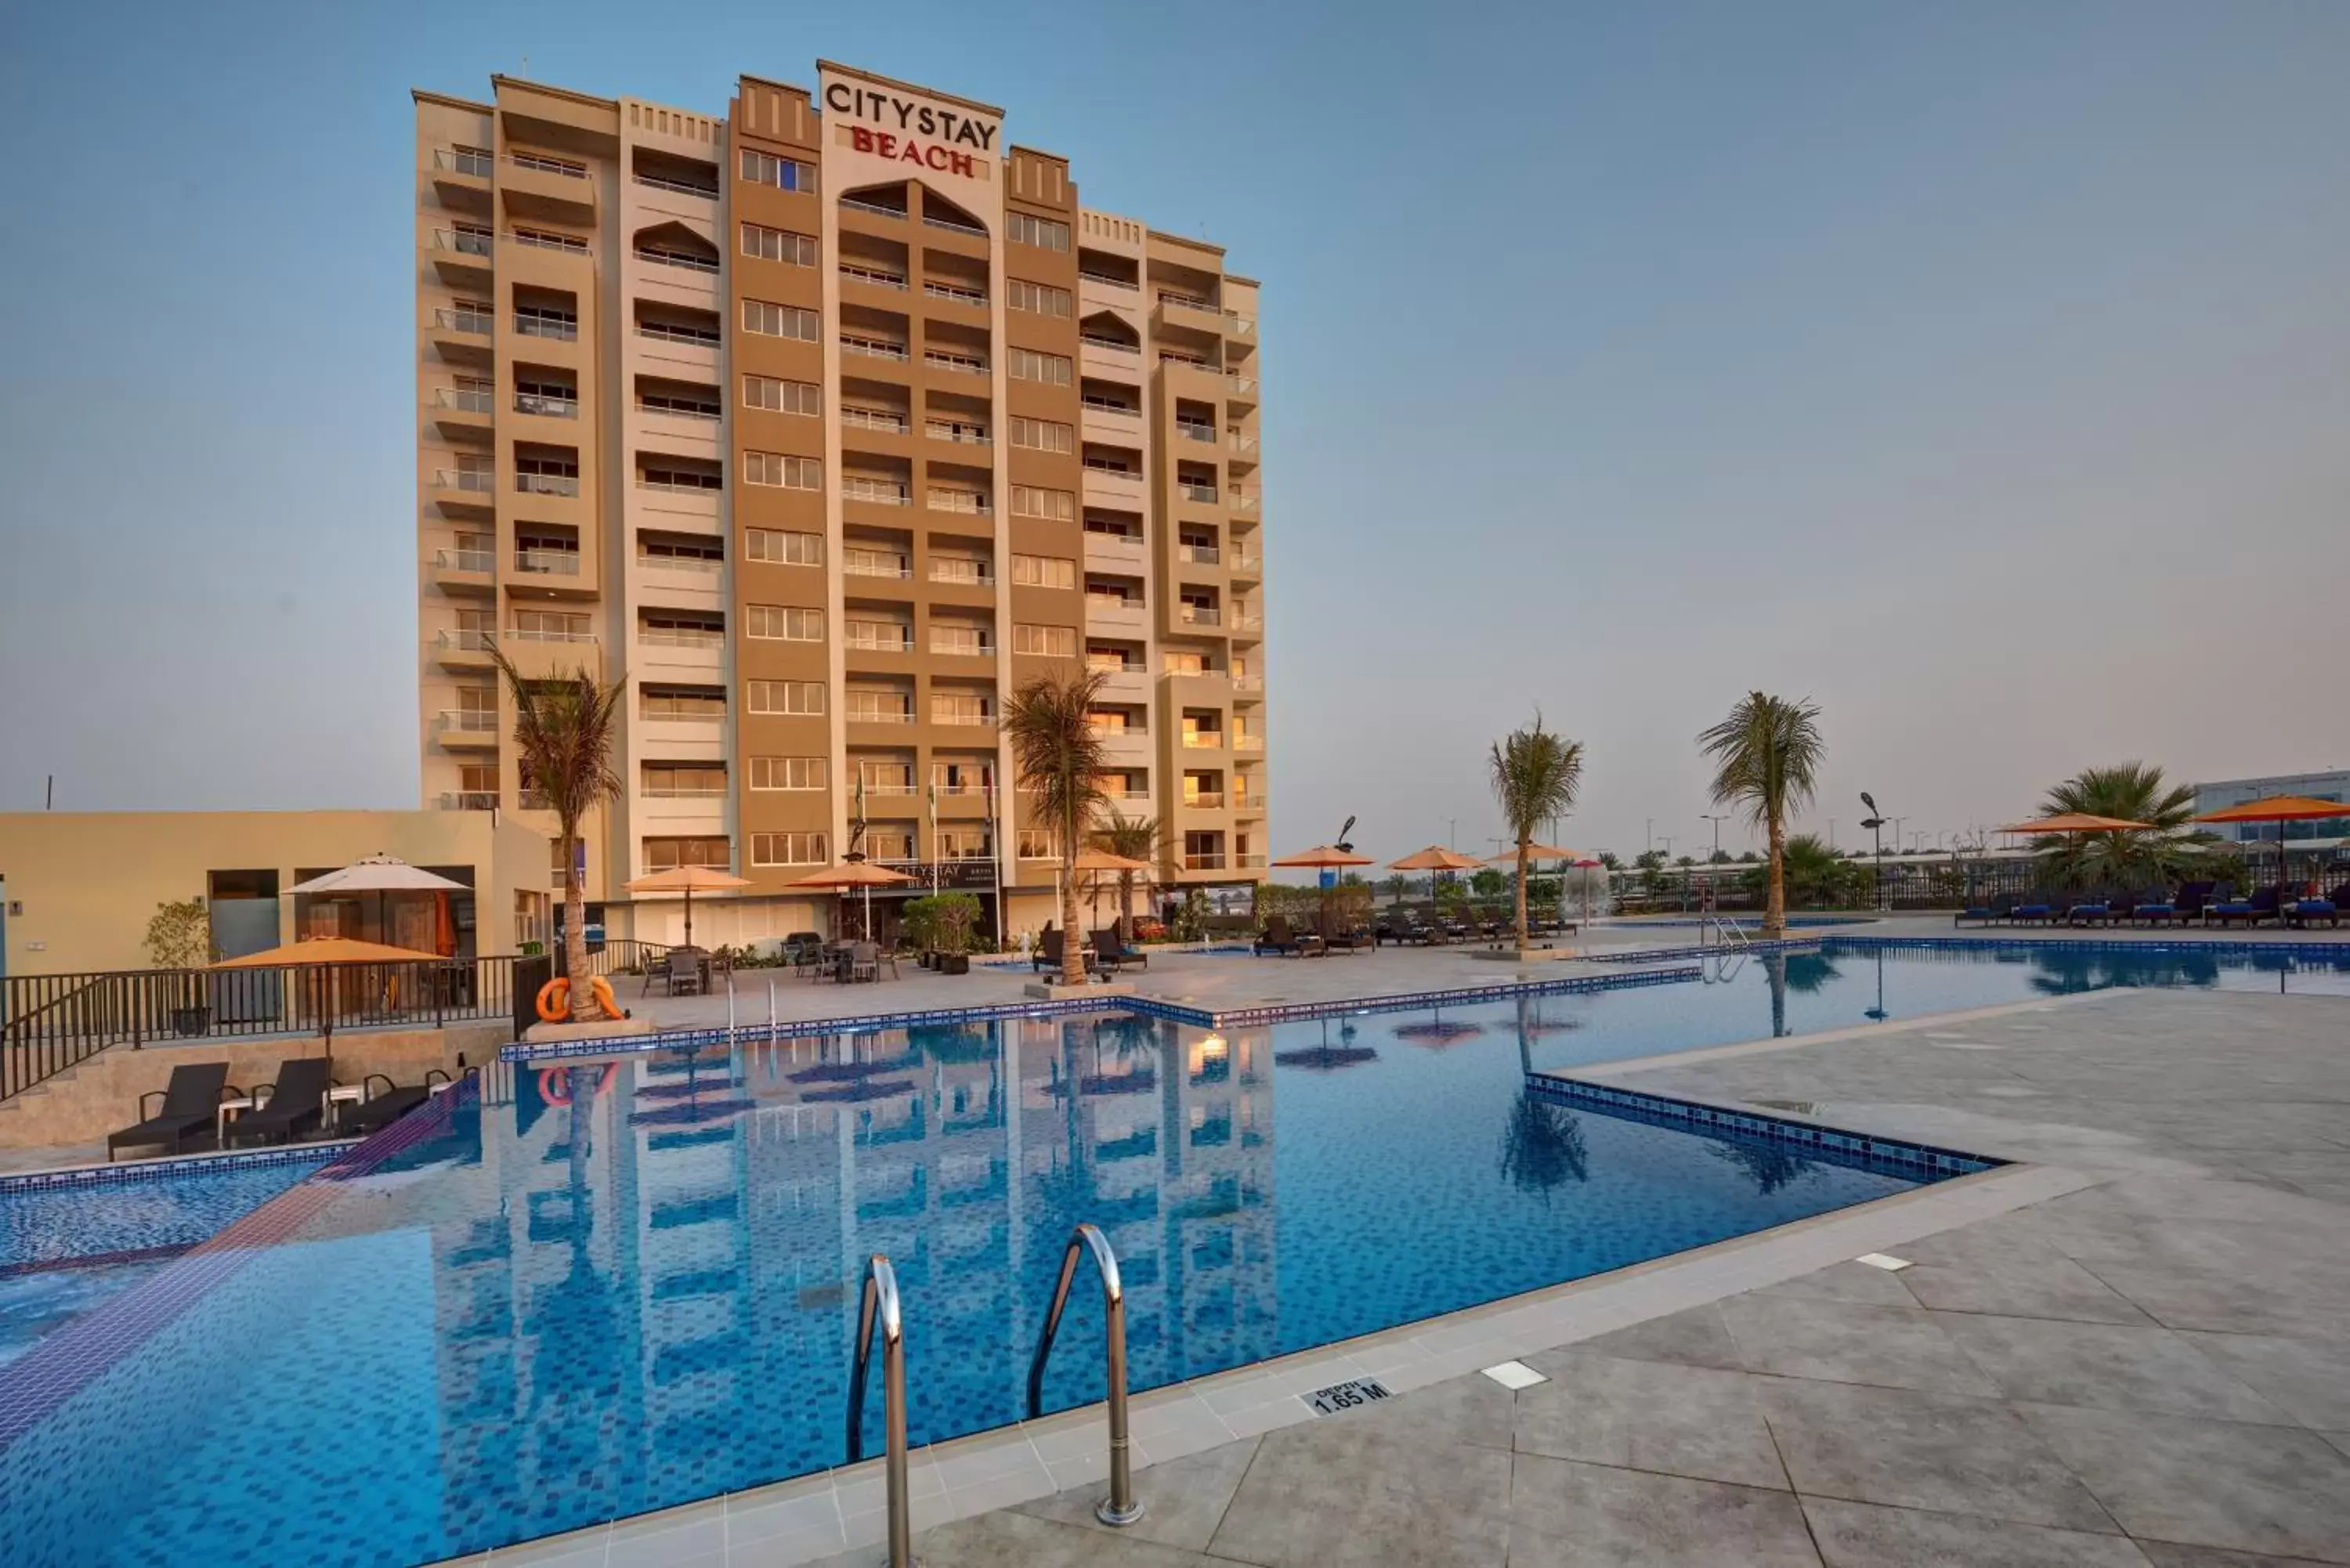 Property building, Swimming Pool in City Stay Beach Hotel Apartments - Marjan Island